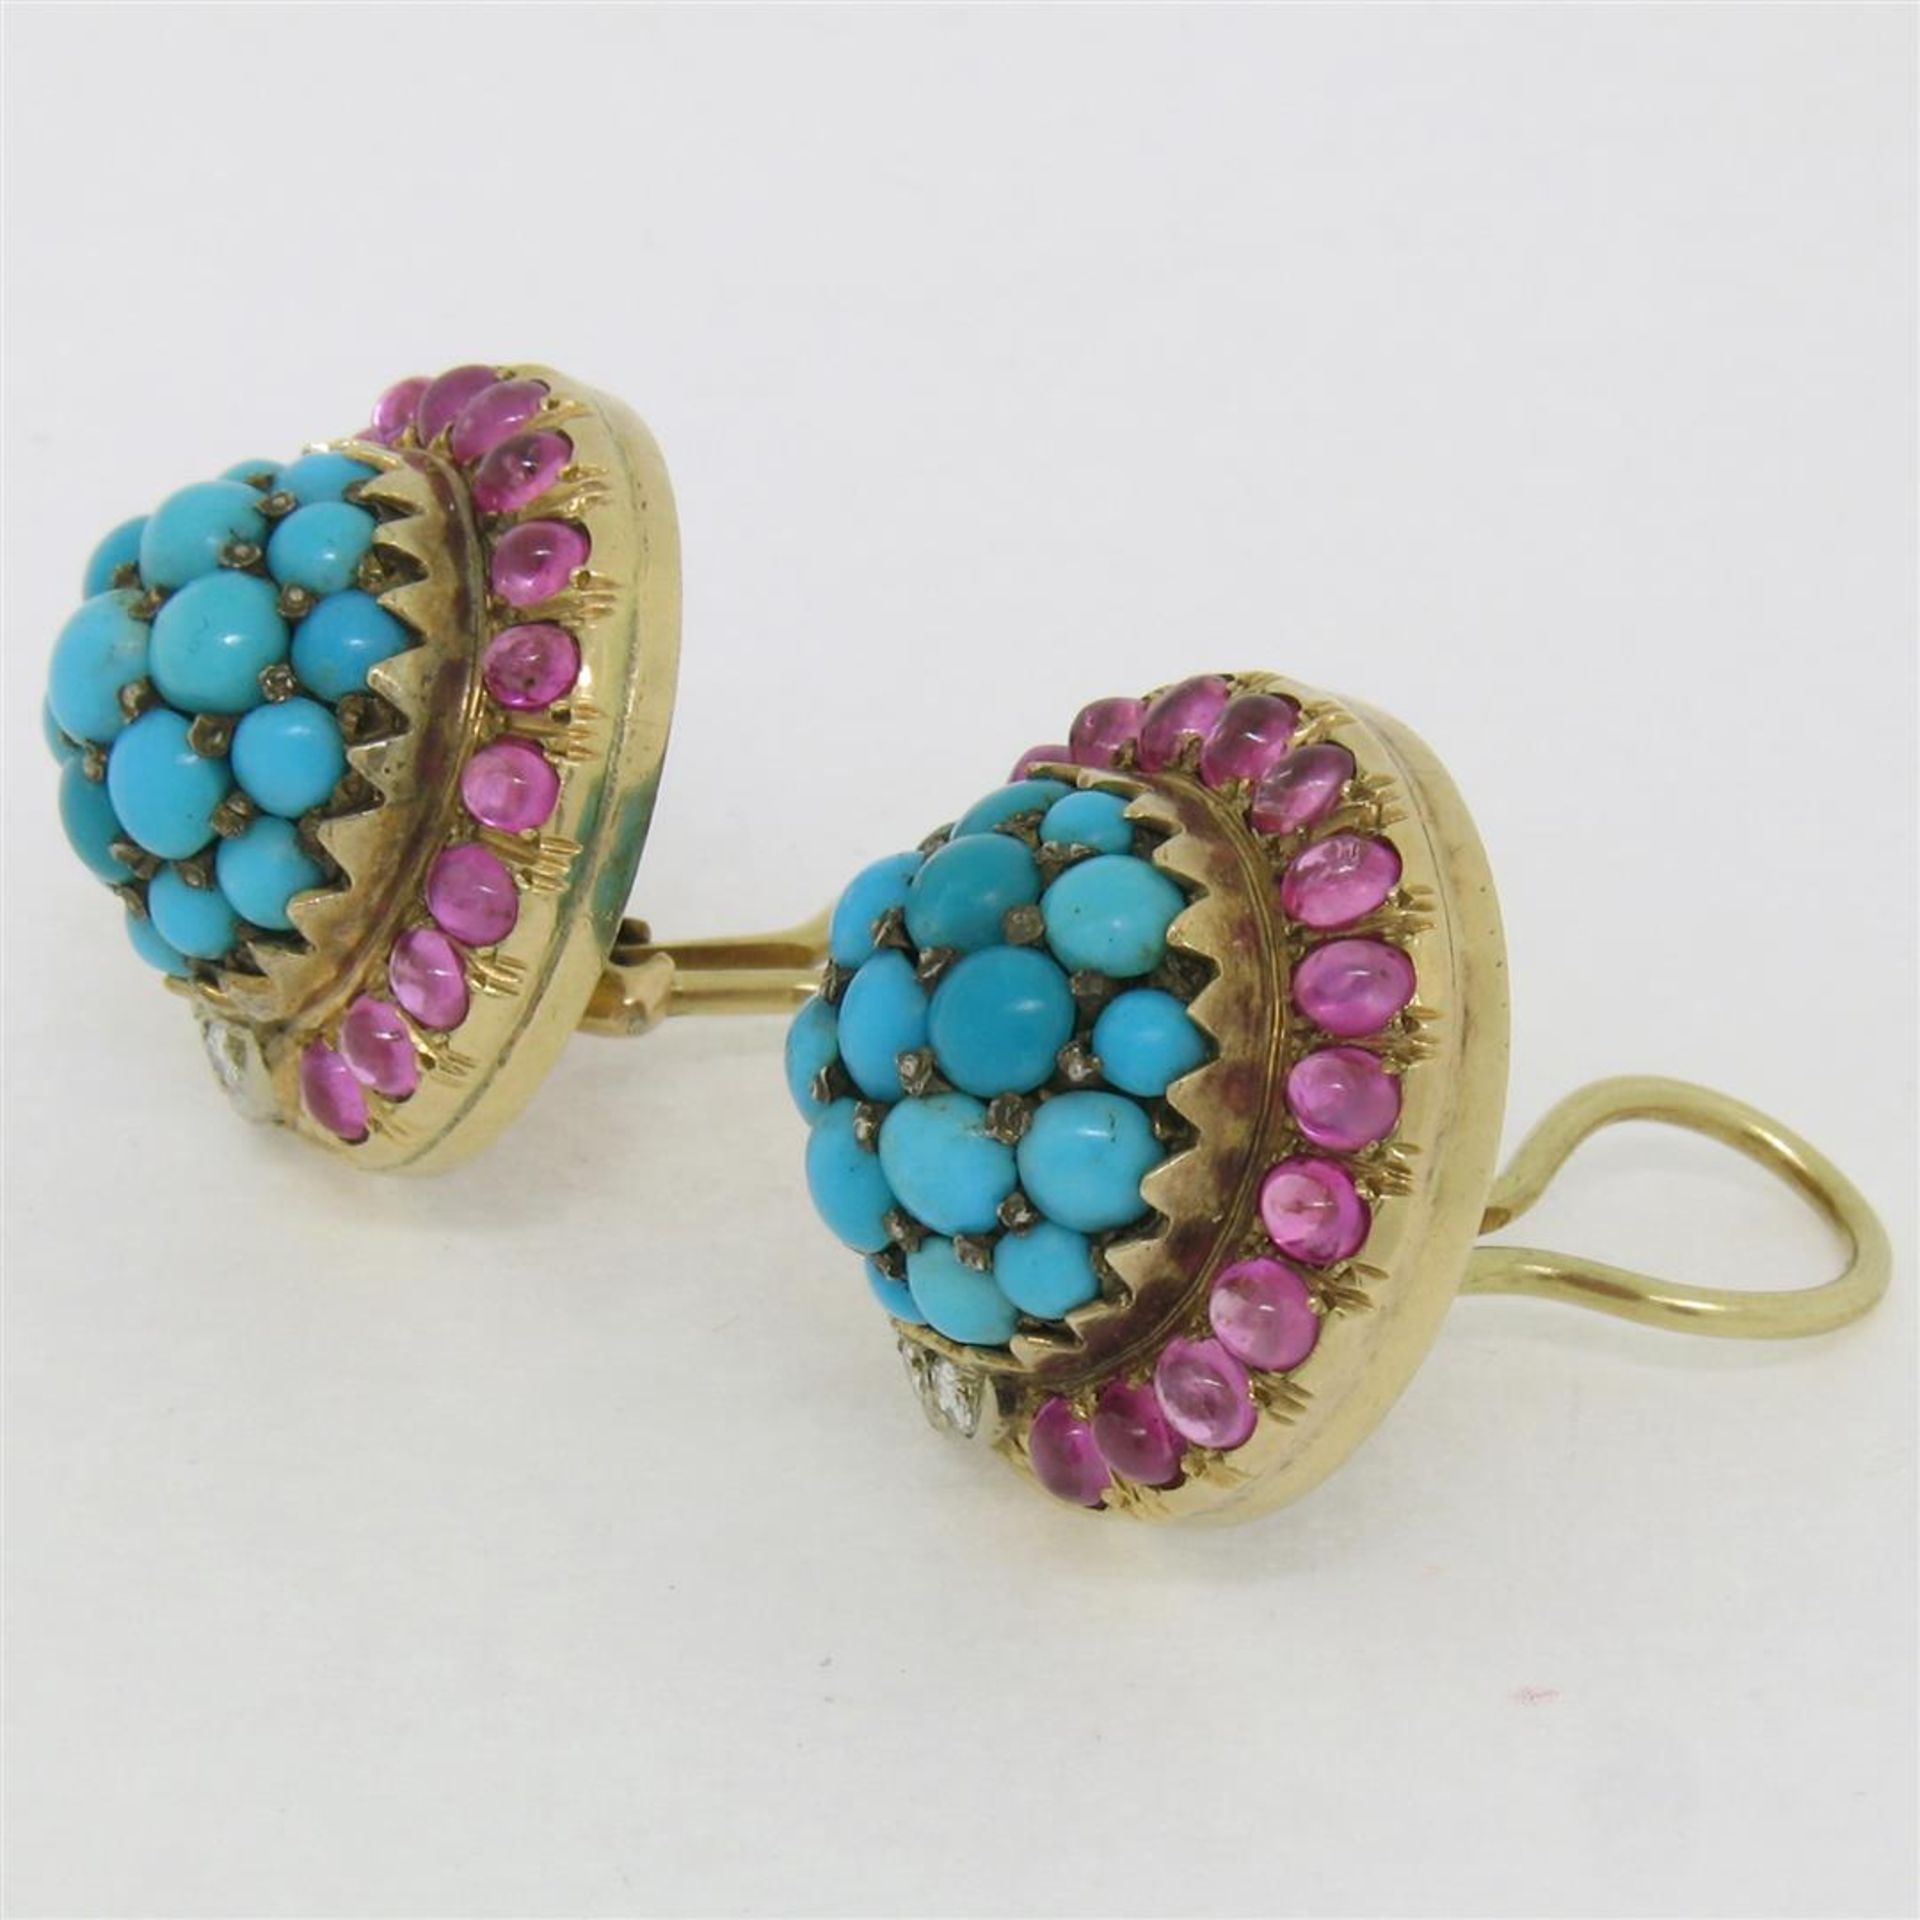 Vintage 14K Yellow Gold 3.56 ctw Turquoise Diamond & Ruby Cluster Button Earring - Image 2 of 9